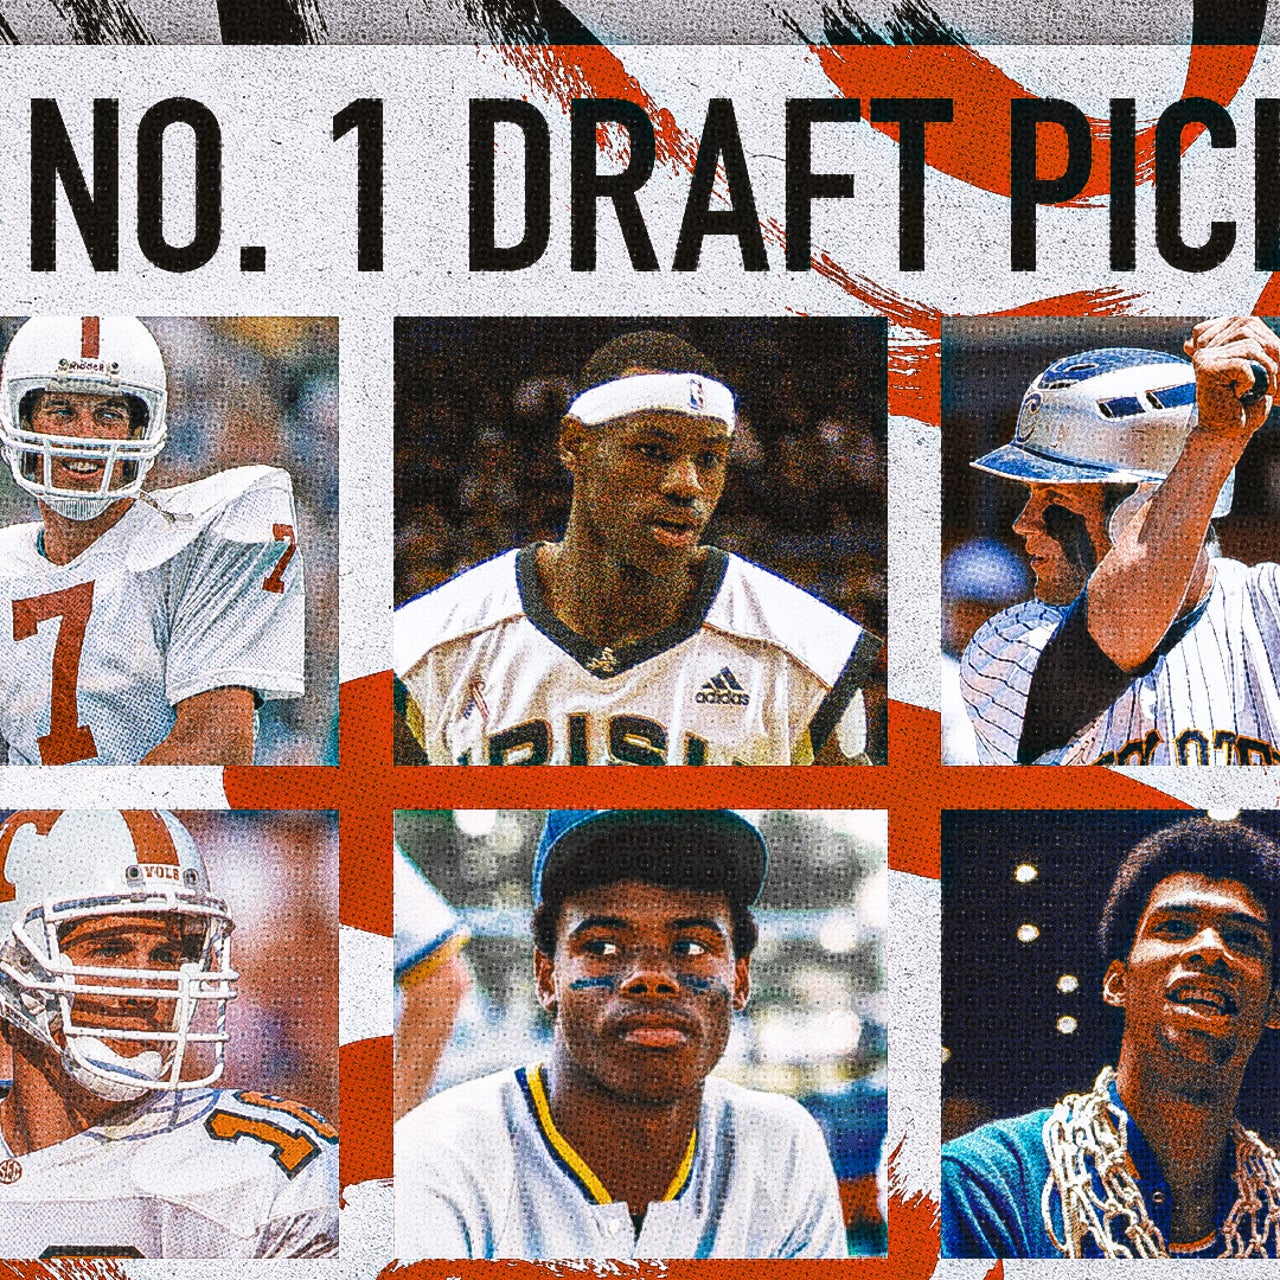 Top 20 most-hyped draft prospects ever: Rankings across NFL, NBA